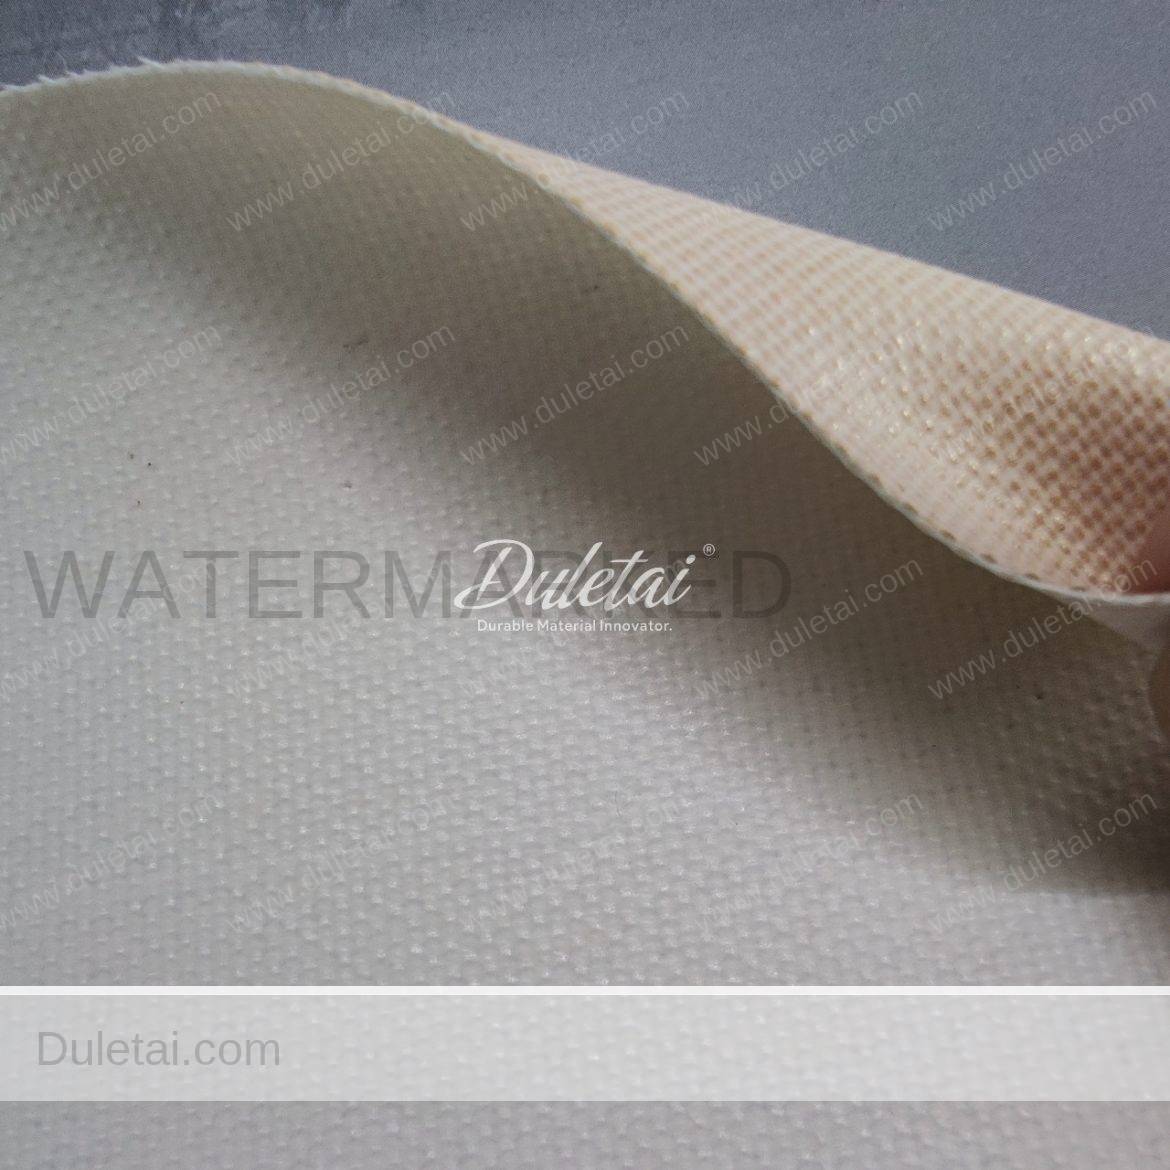 PTFE coated fiberglass membrane is one of the most durable membrane